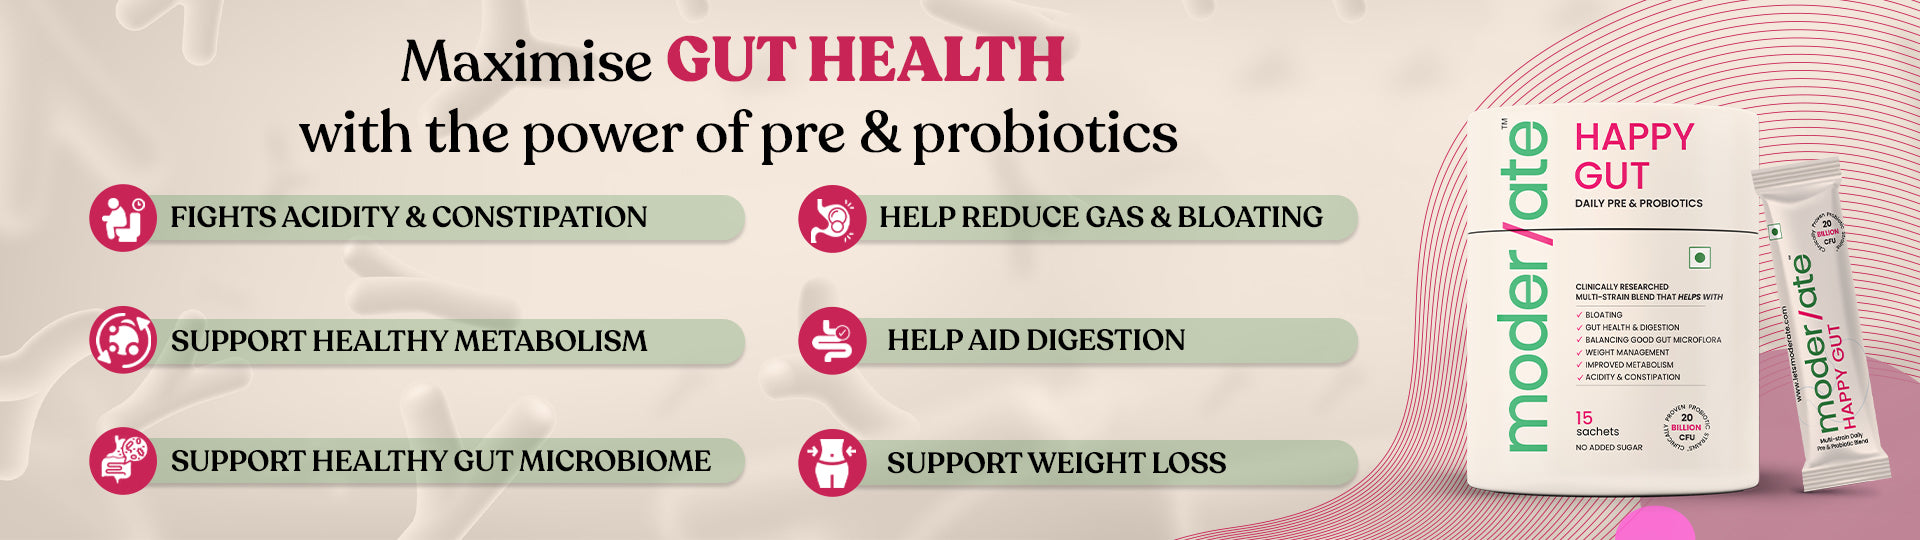 Health Benefits of Moderate Happy Gut